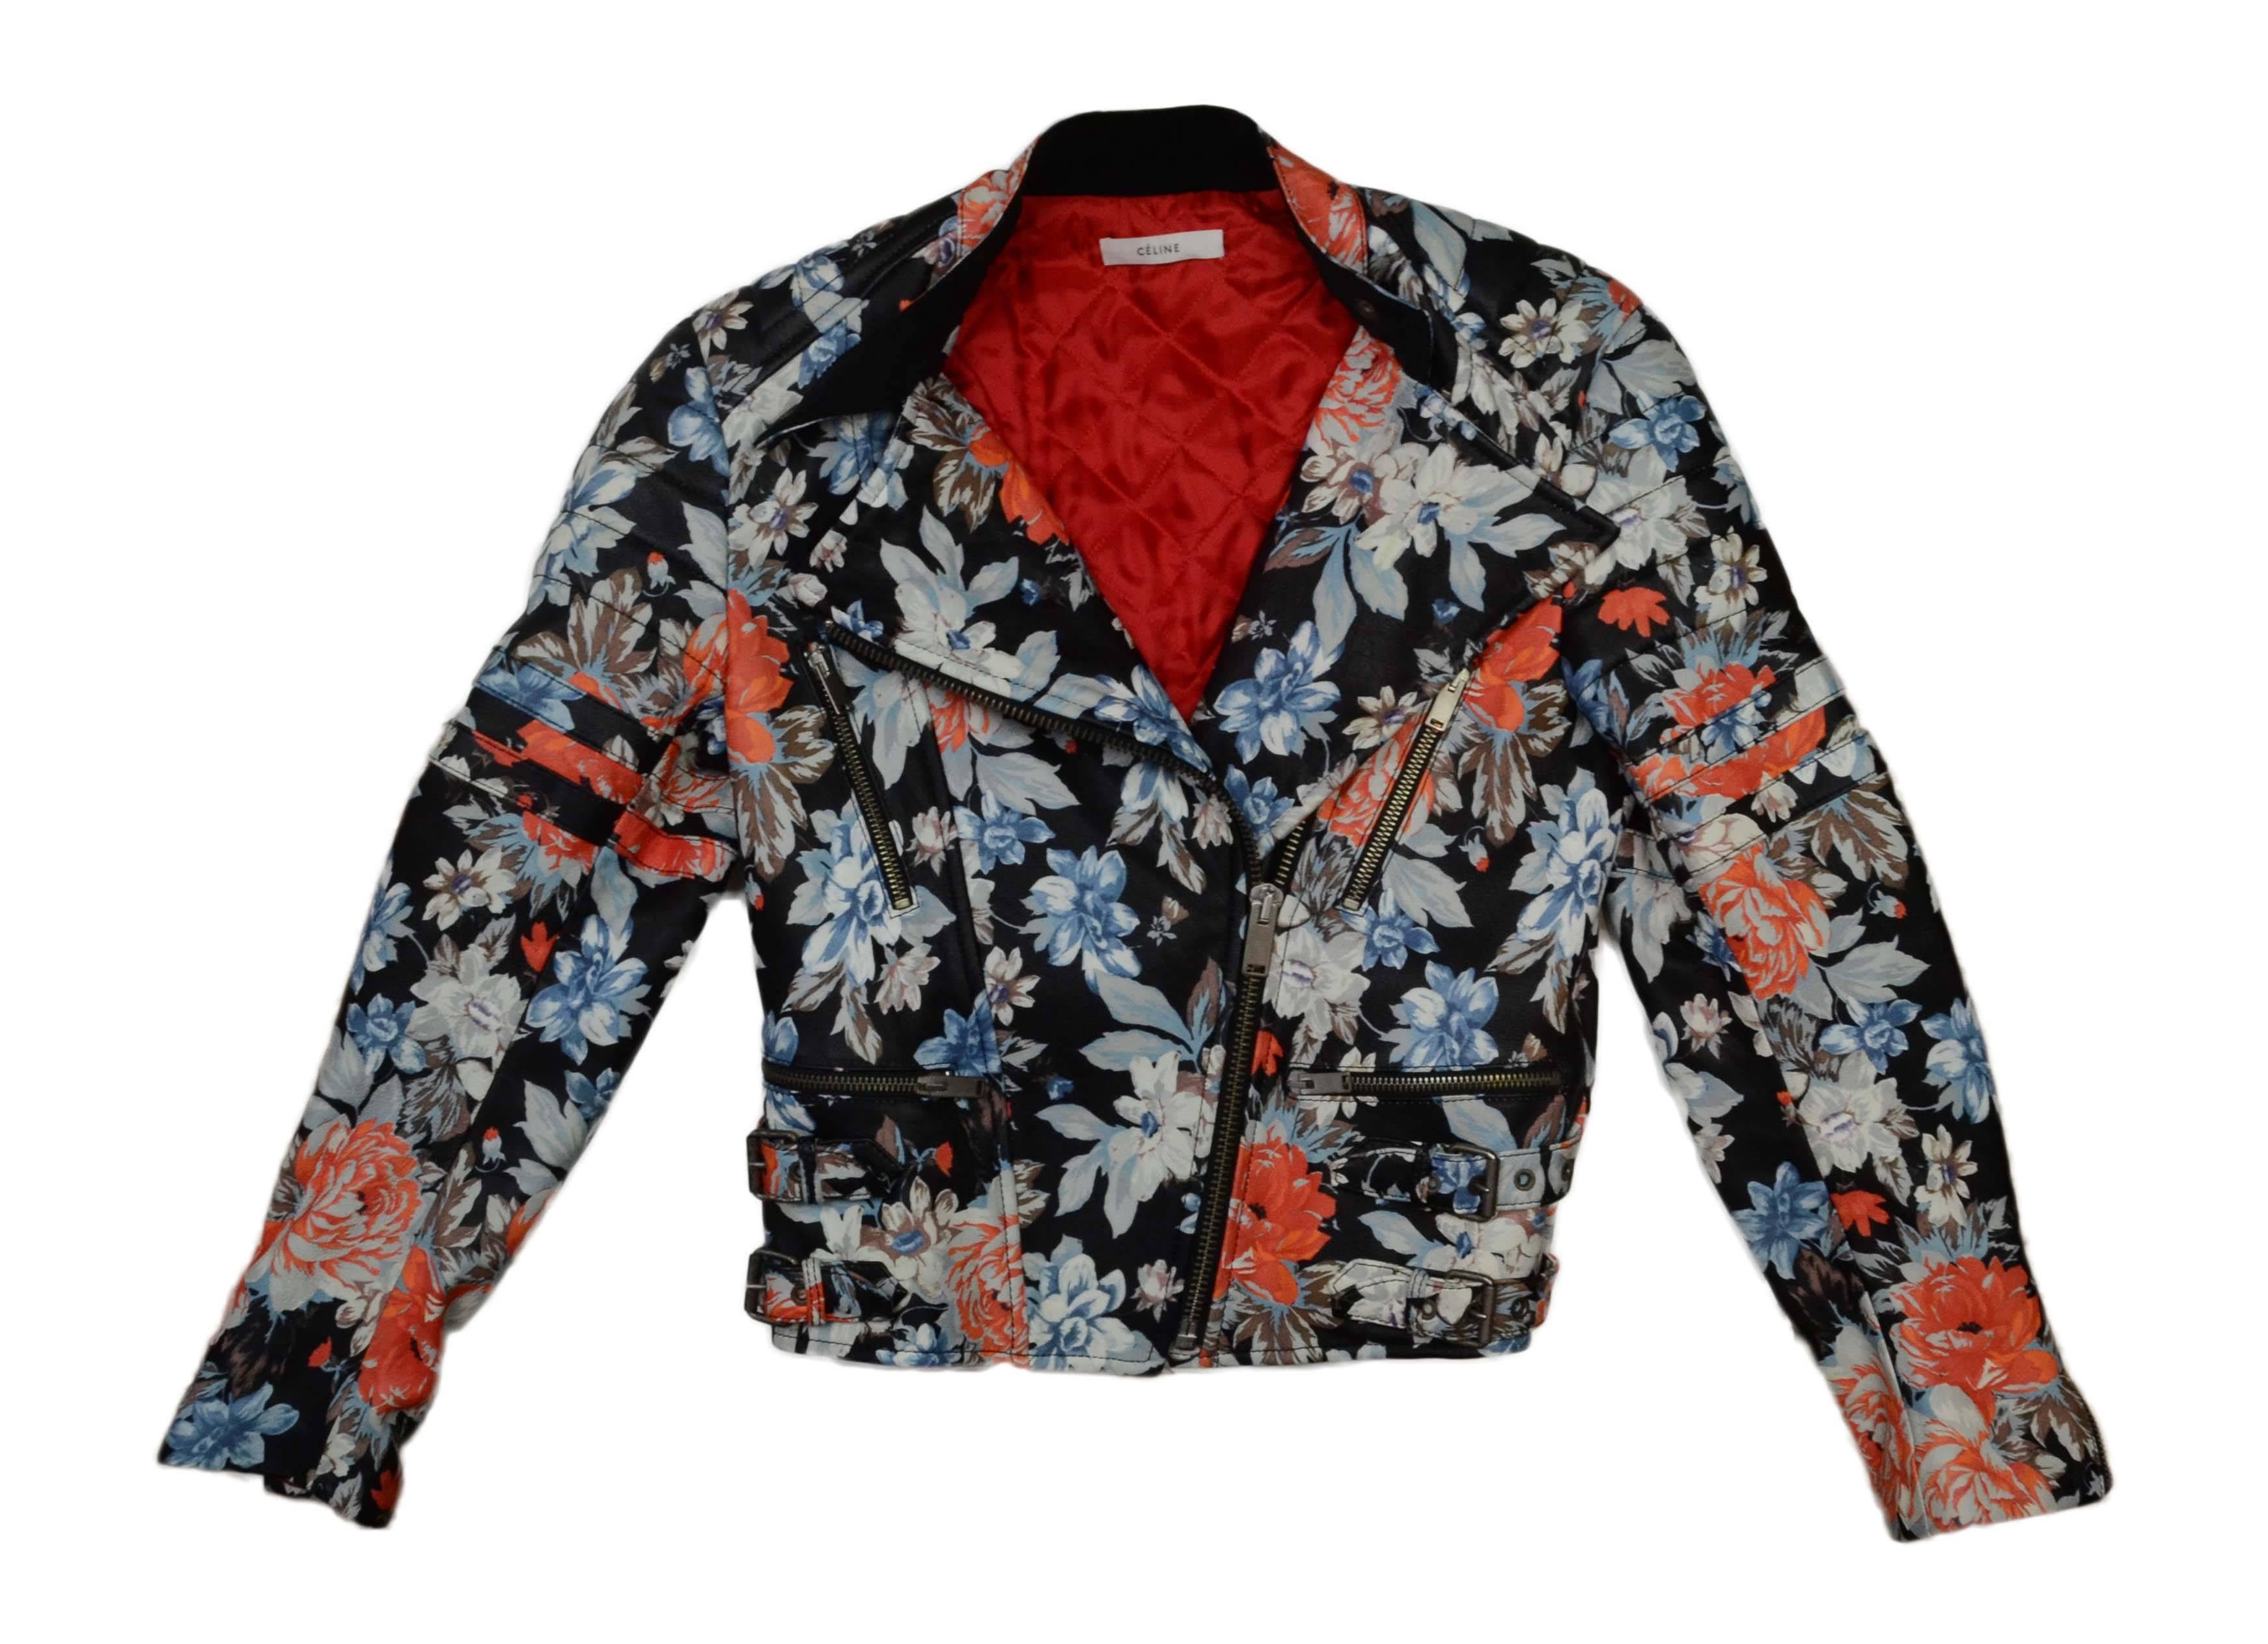 Celine Floral Print Leather Moto Jacket 
Features stitched detailing at shoulders and arms
Made In: Italy
Color: Black and Multi-colored
Composition: 100% lambskin
Lining: Red, 100% viscose
Closure/Opening: Front zip up
Exterior Pockets: Two